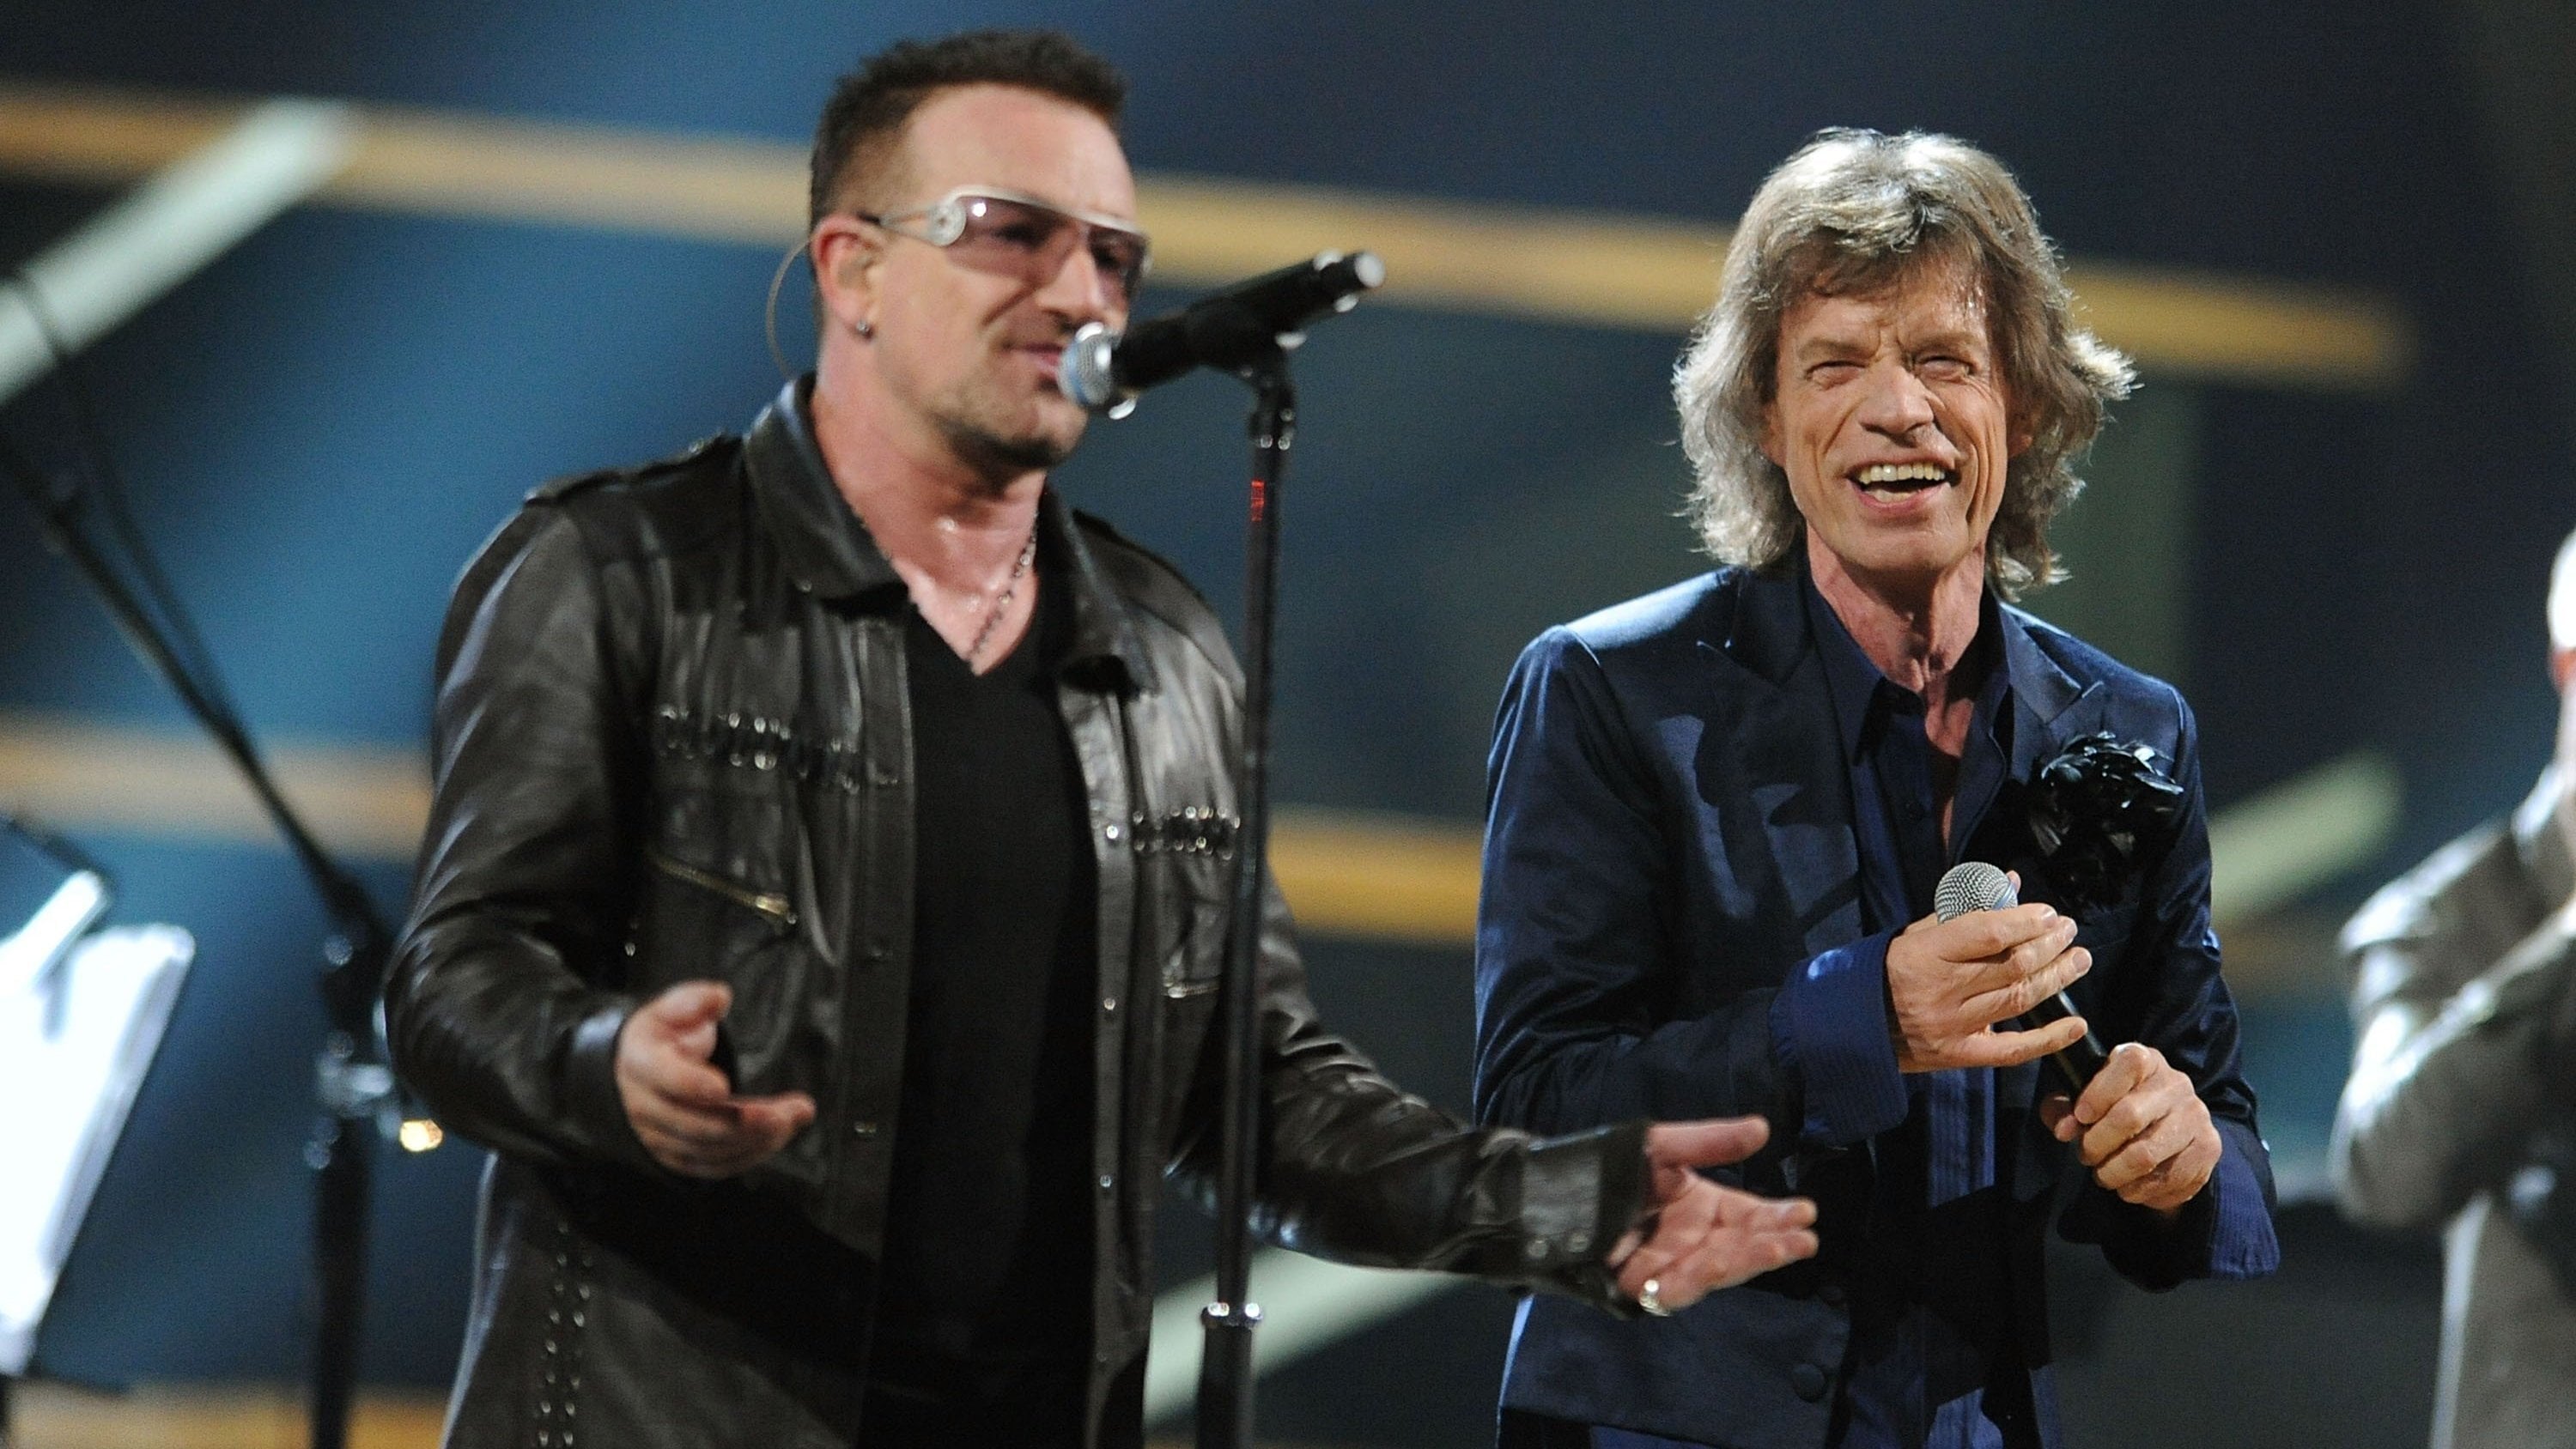 The 25th Anniversary Rock and Roll Hall of Fame Concerts (2009)